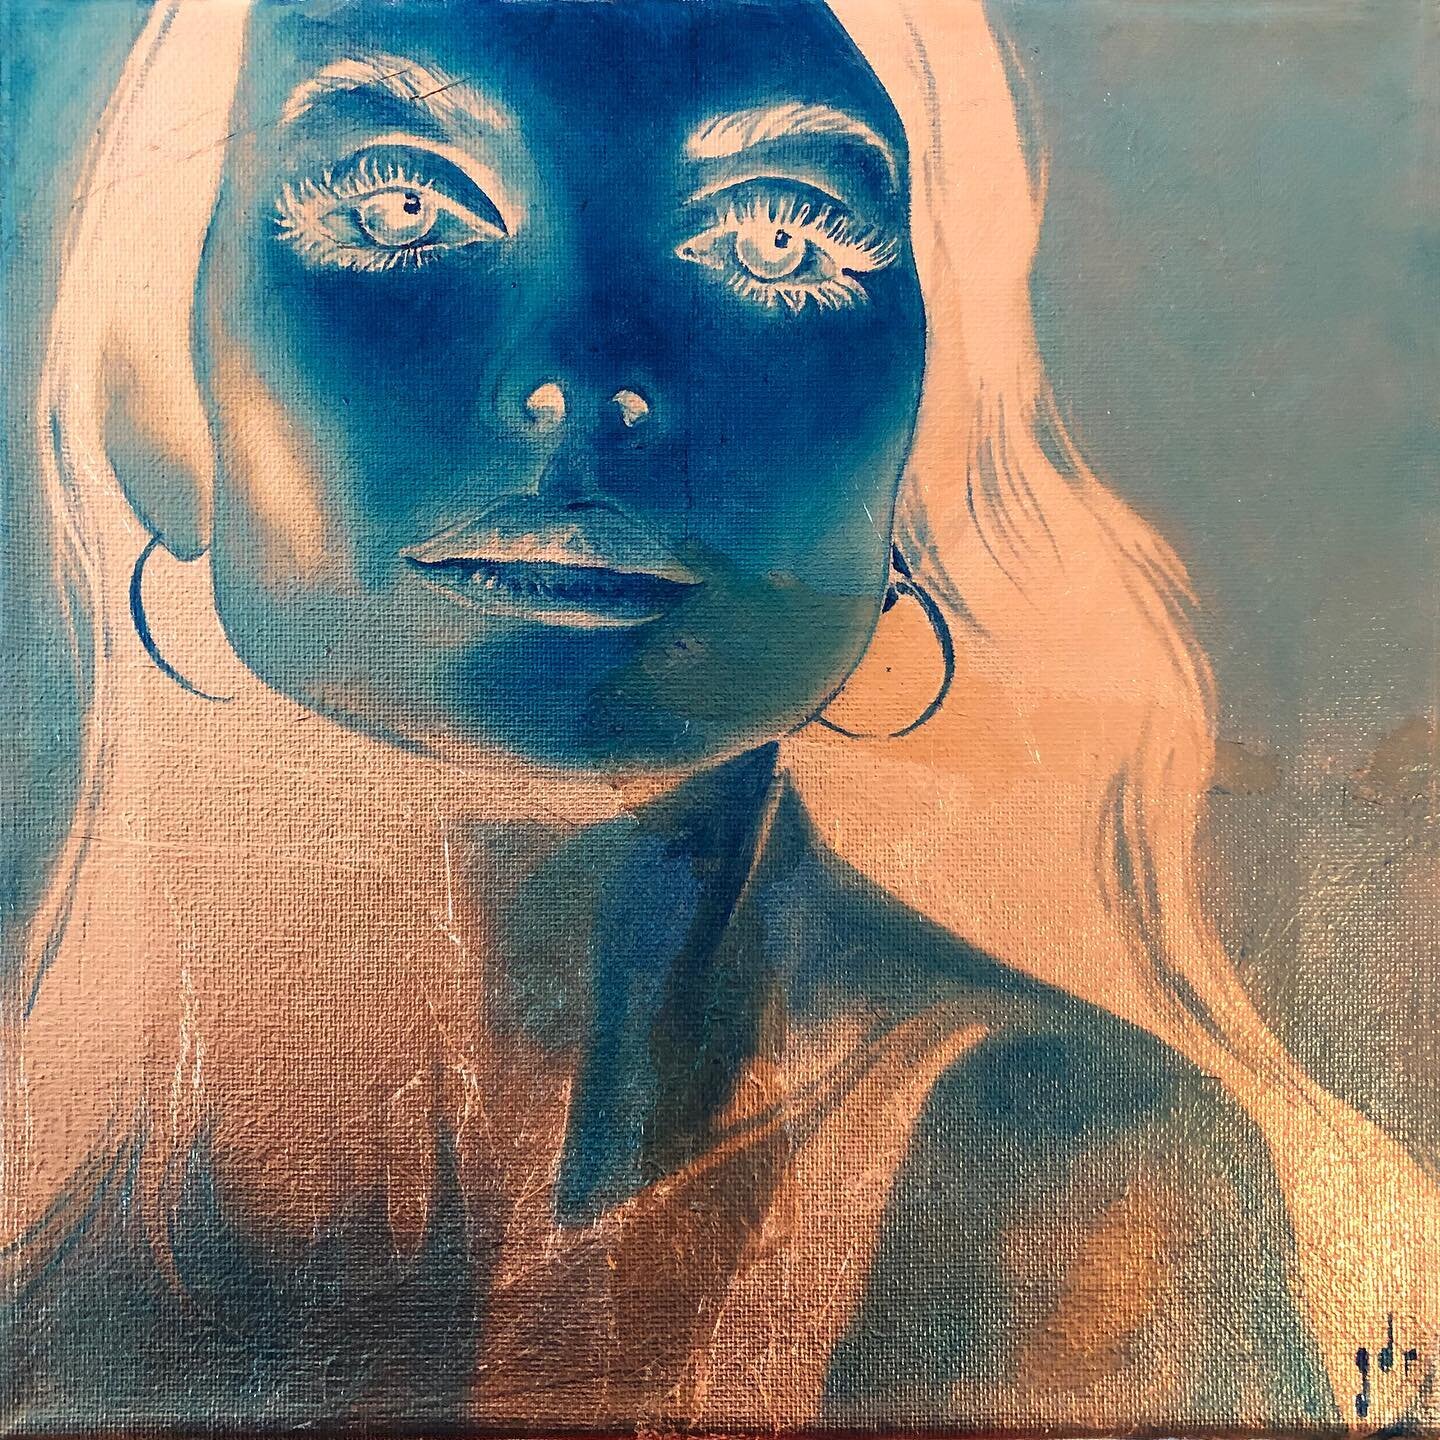 &ldquo;Her Smile&rdquo;
Oil and copper leaf on canvas 
10&rdquo;x10&rdquo; (sold)
#oilpainting #painting #copper #blue #copperleaf #face #portrait #reverse #hair #beauty #woman #art #arte #gingerdelrey #smile #artfinder